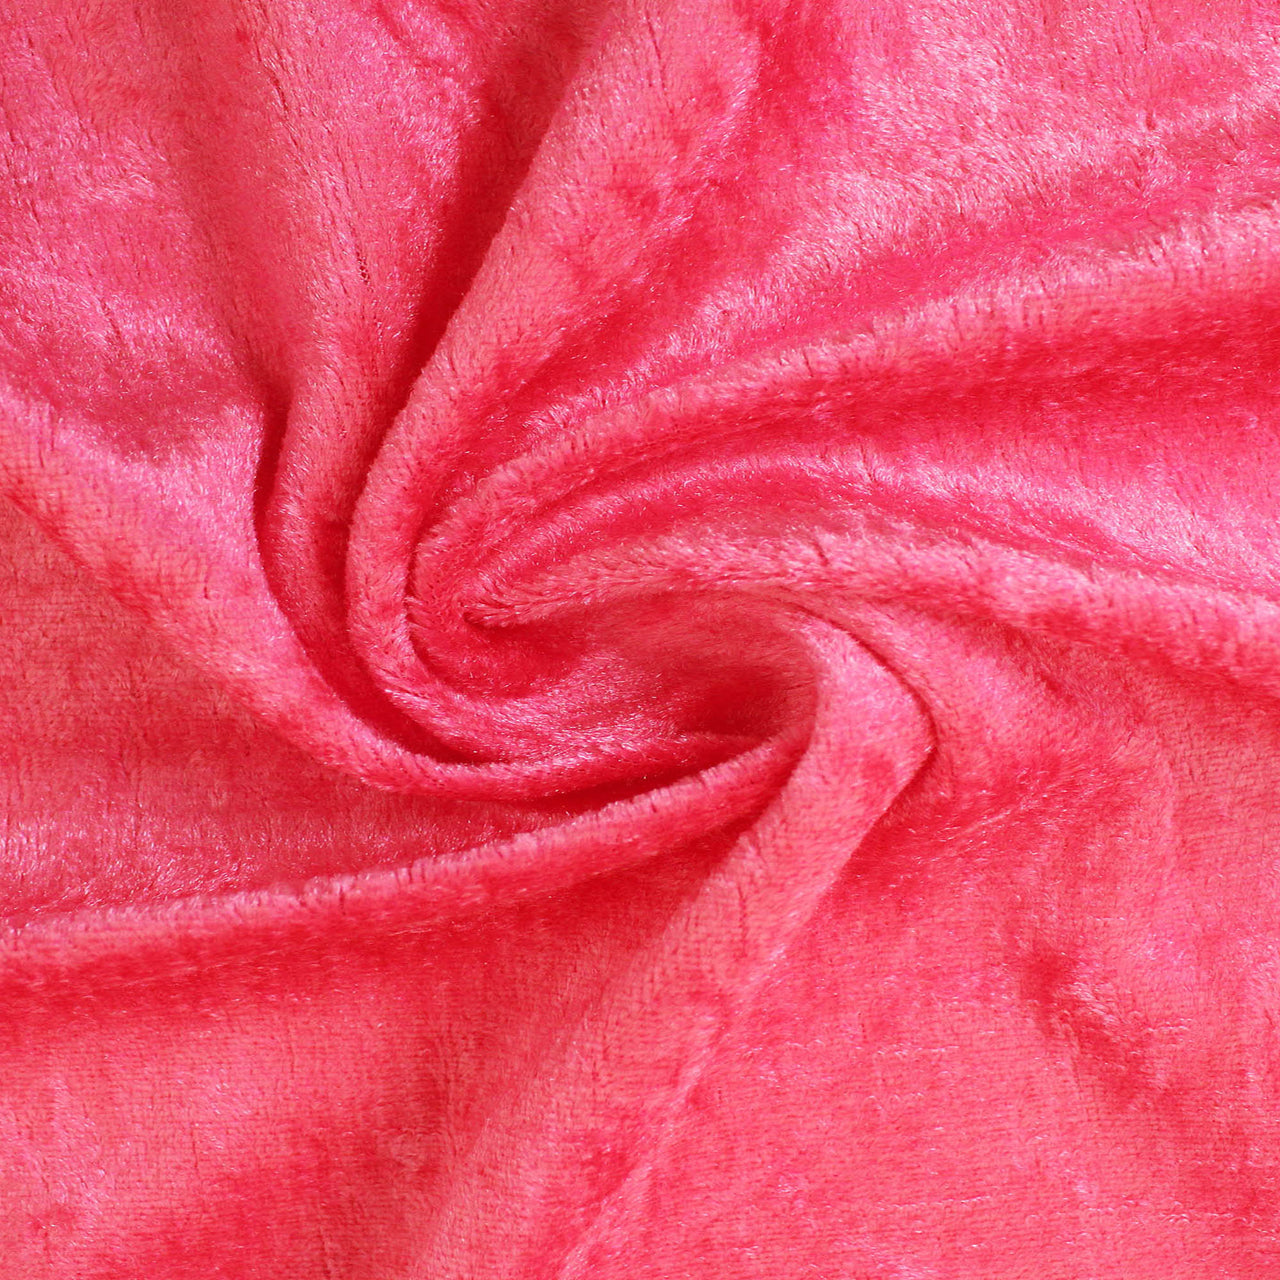 Cerise - Crushed Velvet Velour Fabric - Natural One Way Stretch For Costumes & Drapes